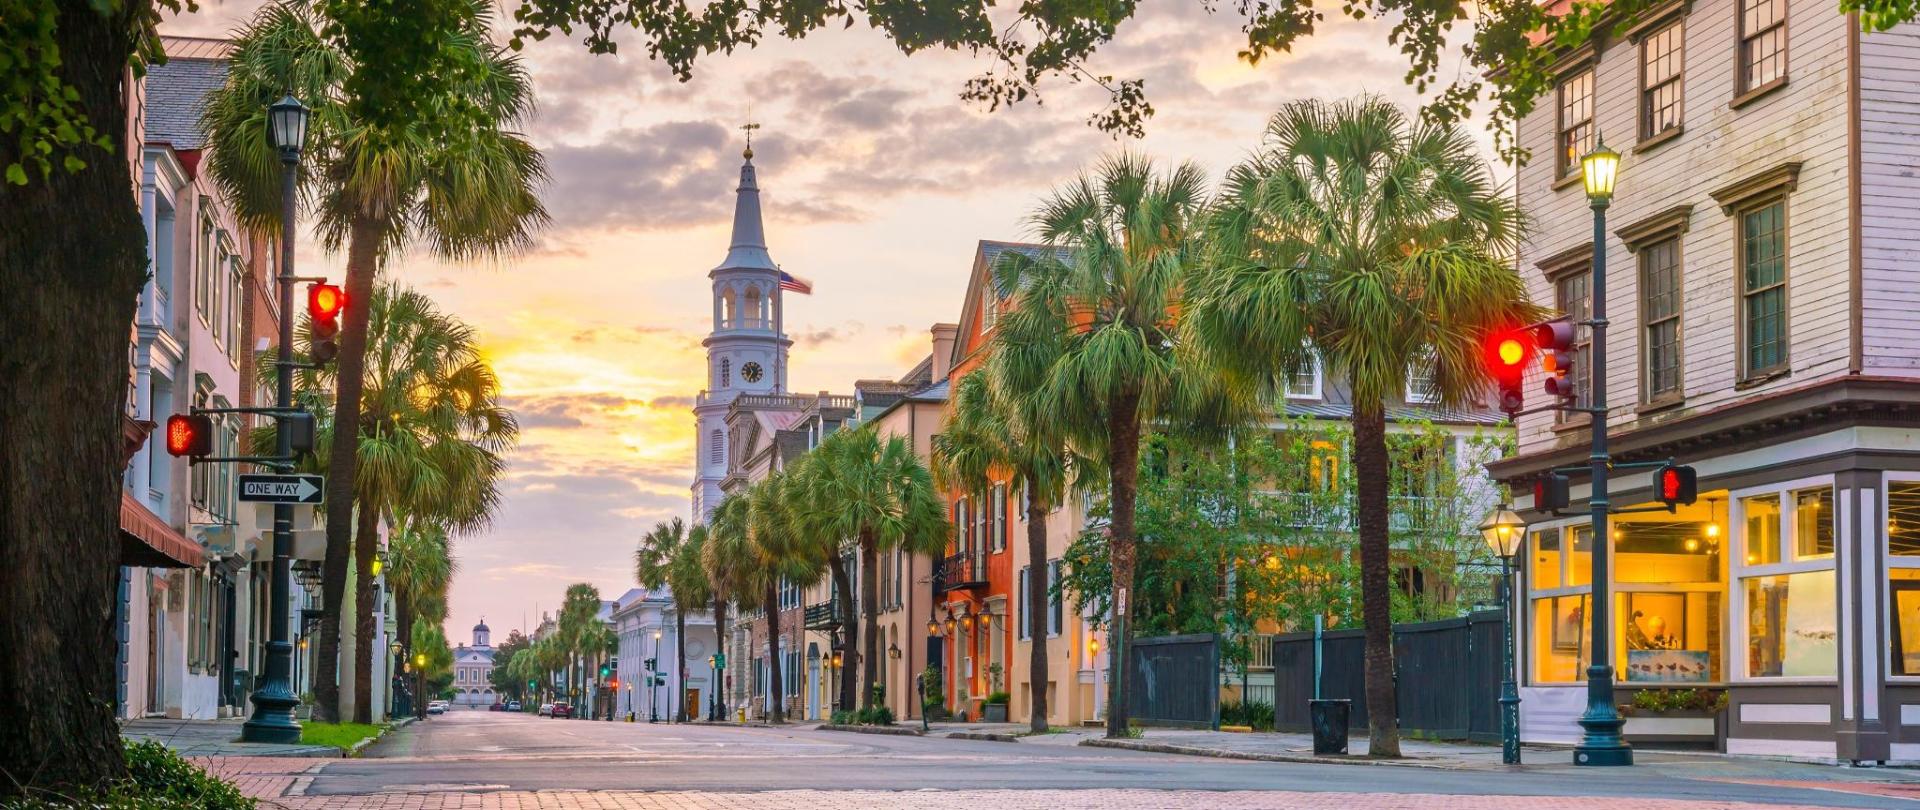 Best Place to live in Charleston - Mount Pleasant